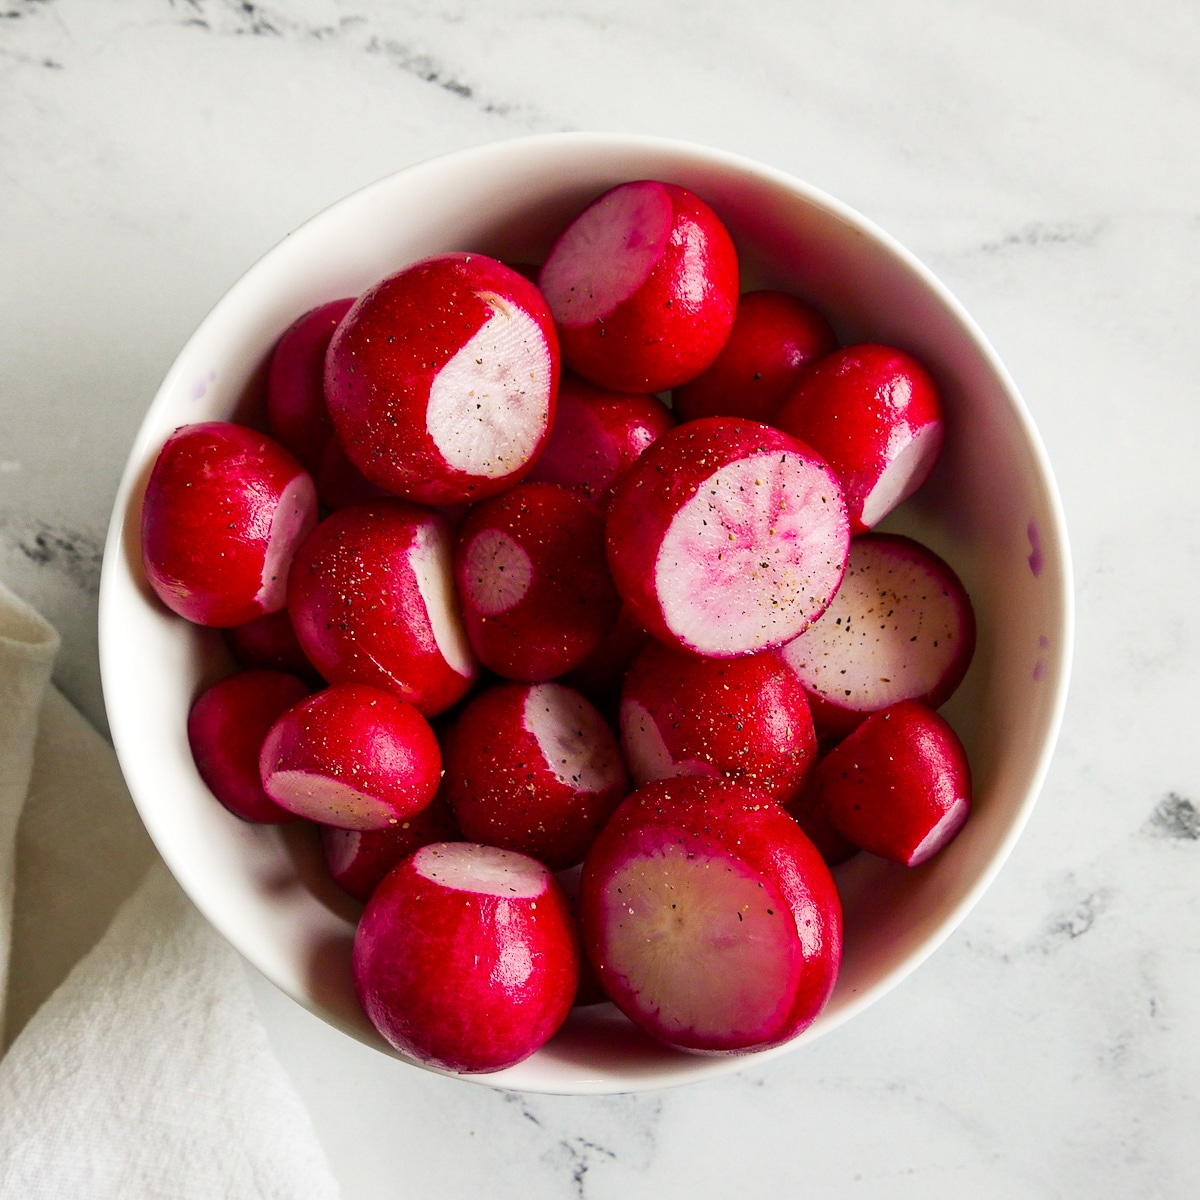 trimmed radishes tossed with olive oil in a white bowl.